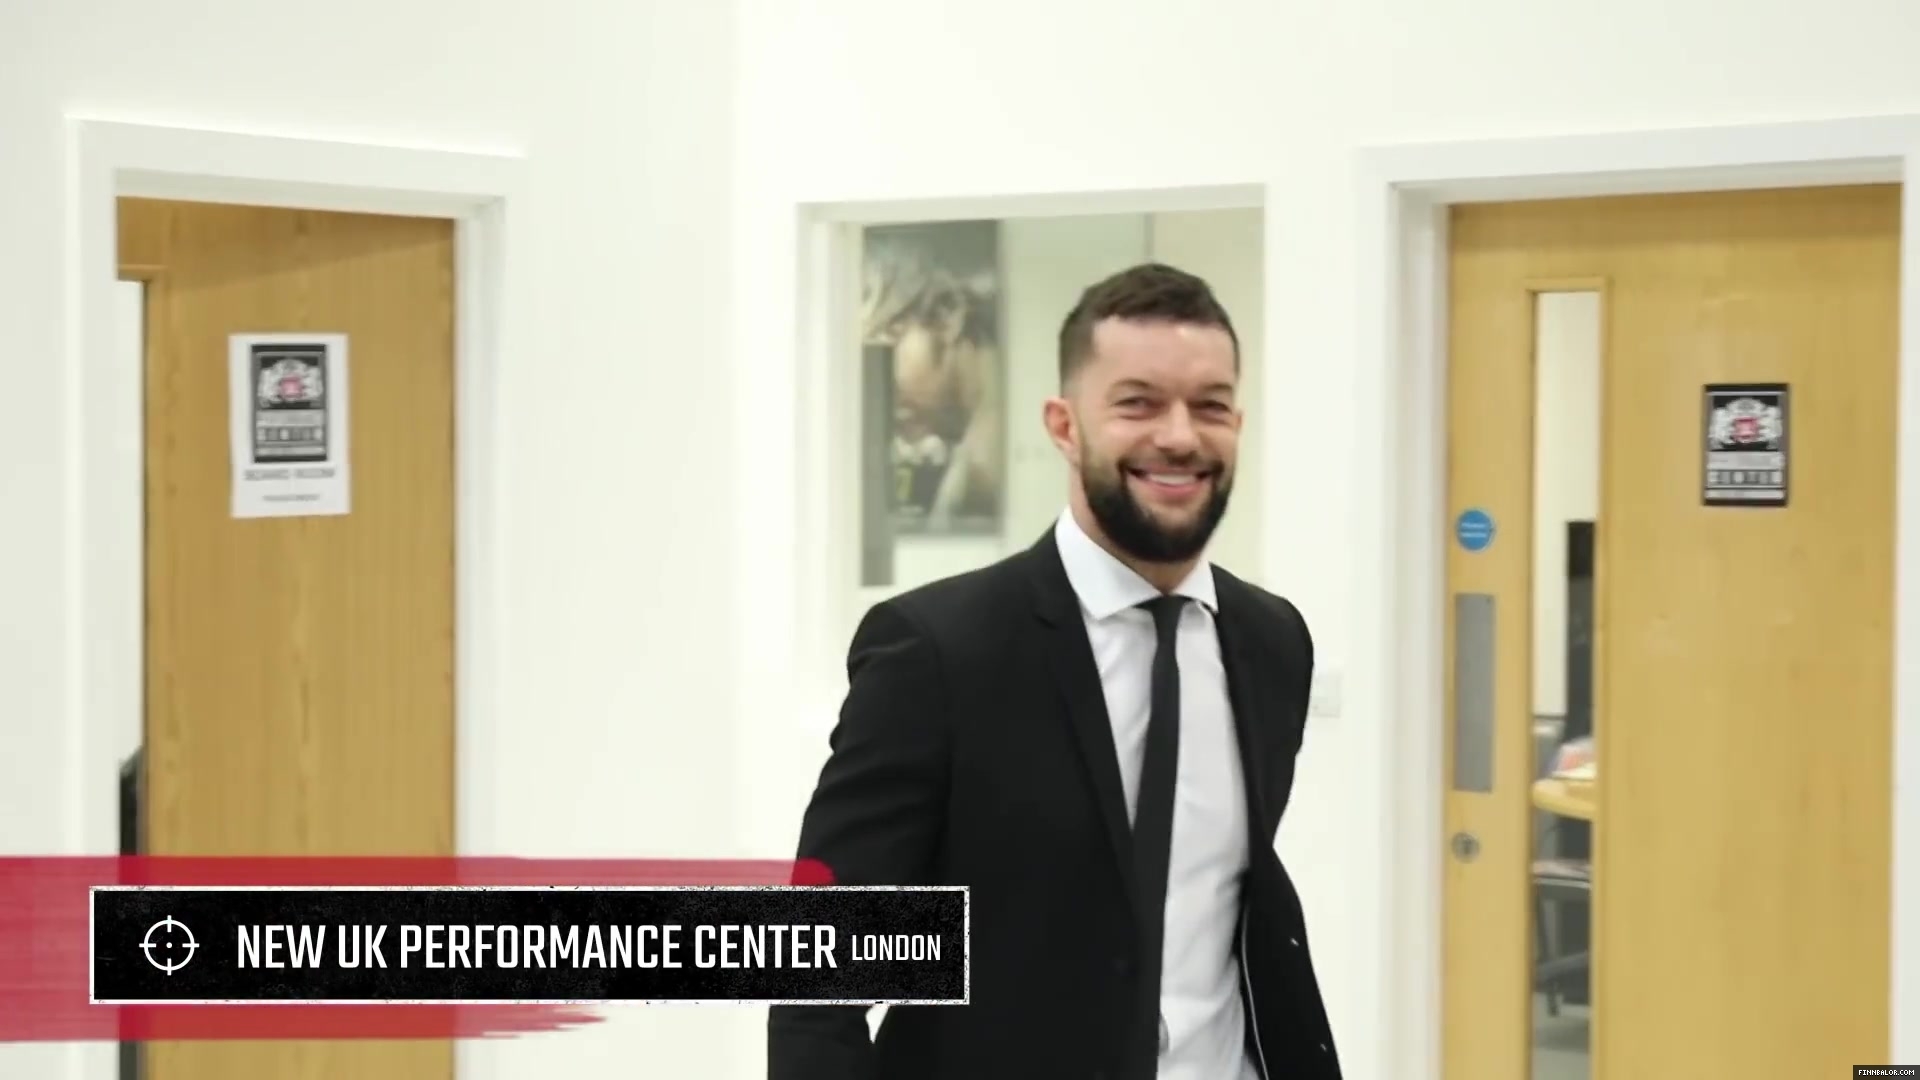 WWE_Superstar_FINN_BALOR_joins_MOUSTACHE_MOUNTAIN_at_the_opening_of_the_NXT_UK_PC_013.jpg